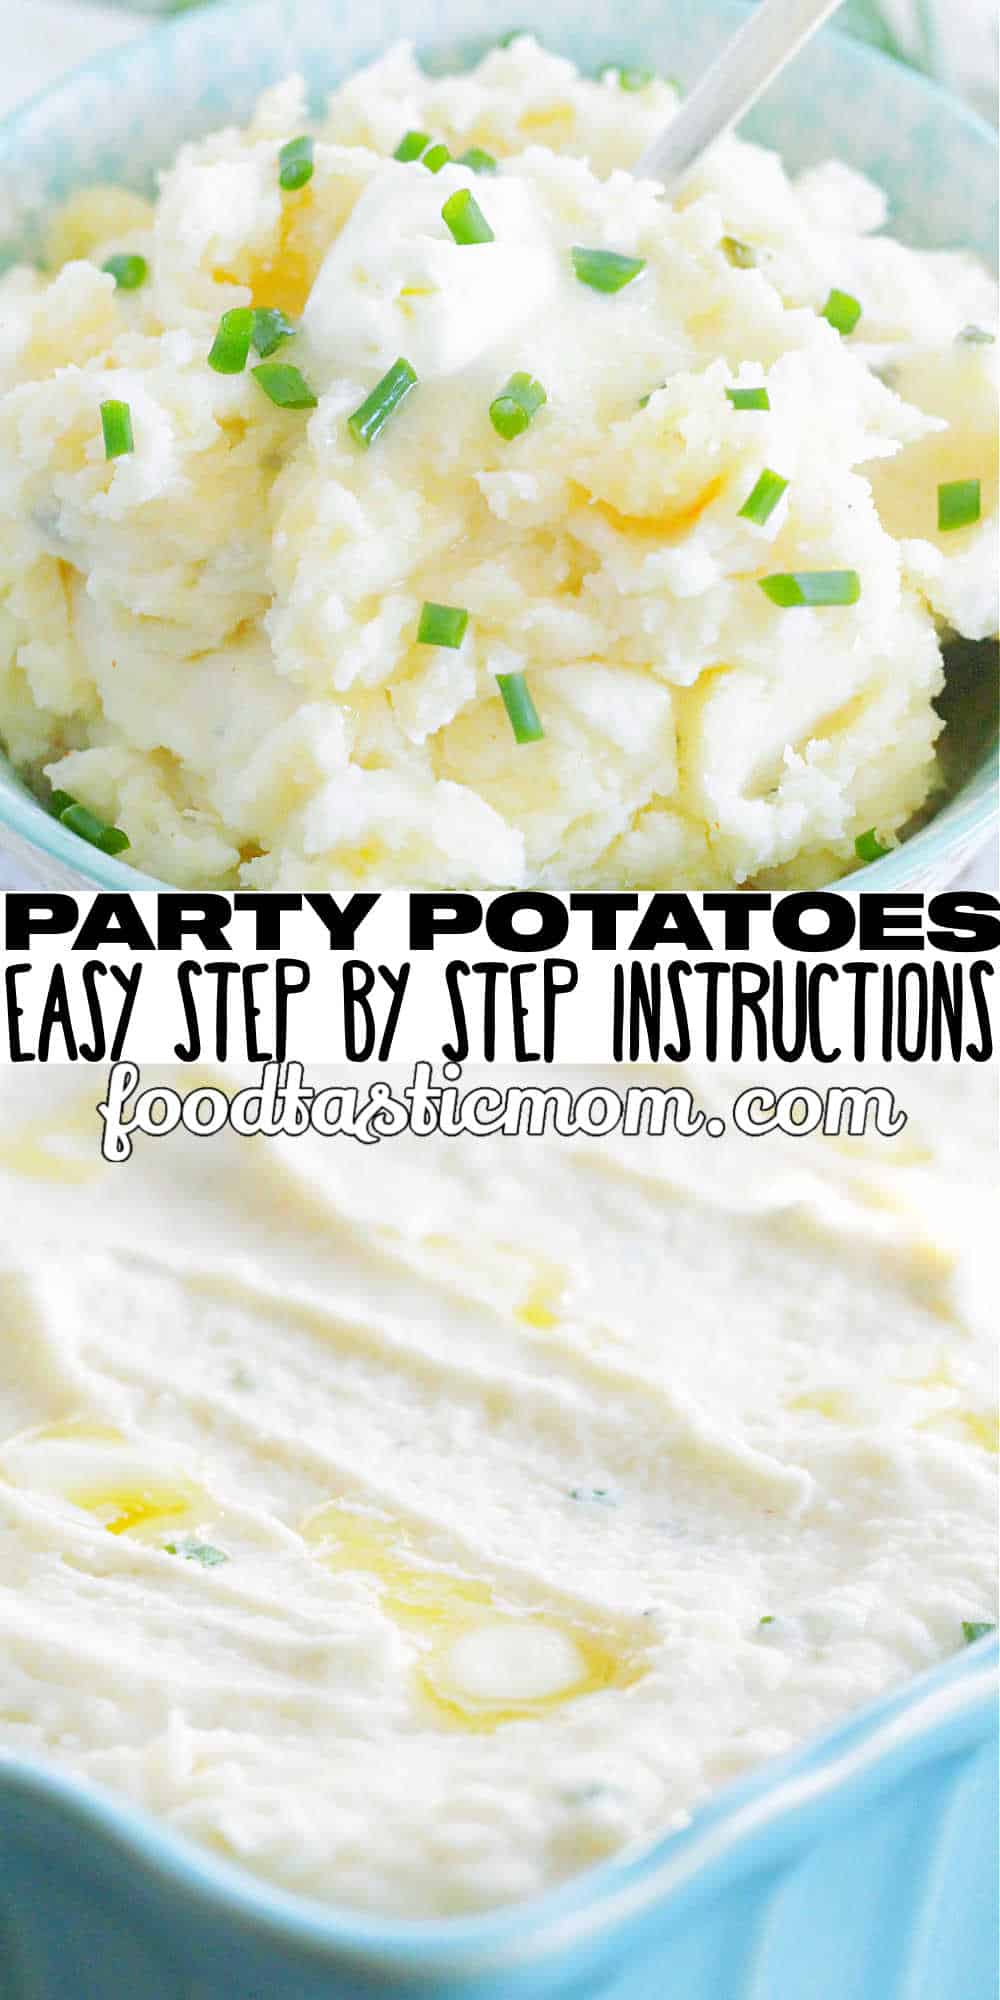 Party Potatoes are the ultimate make-ahead potatoes for holiday entertaining! Creamy mashed potatoes baked in the oven when ready to serve via @foodtasticmom